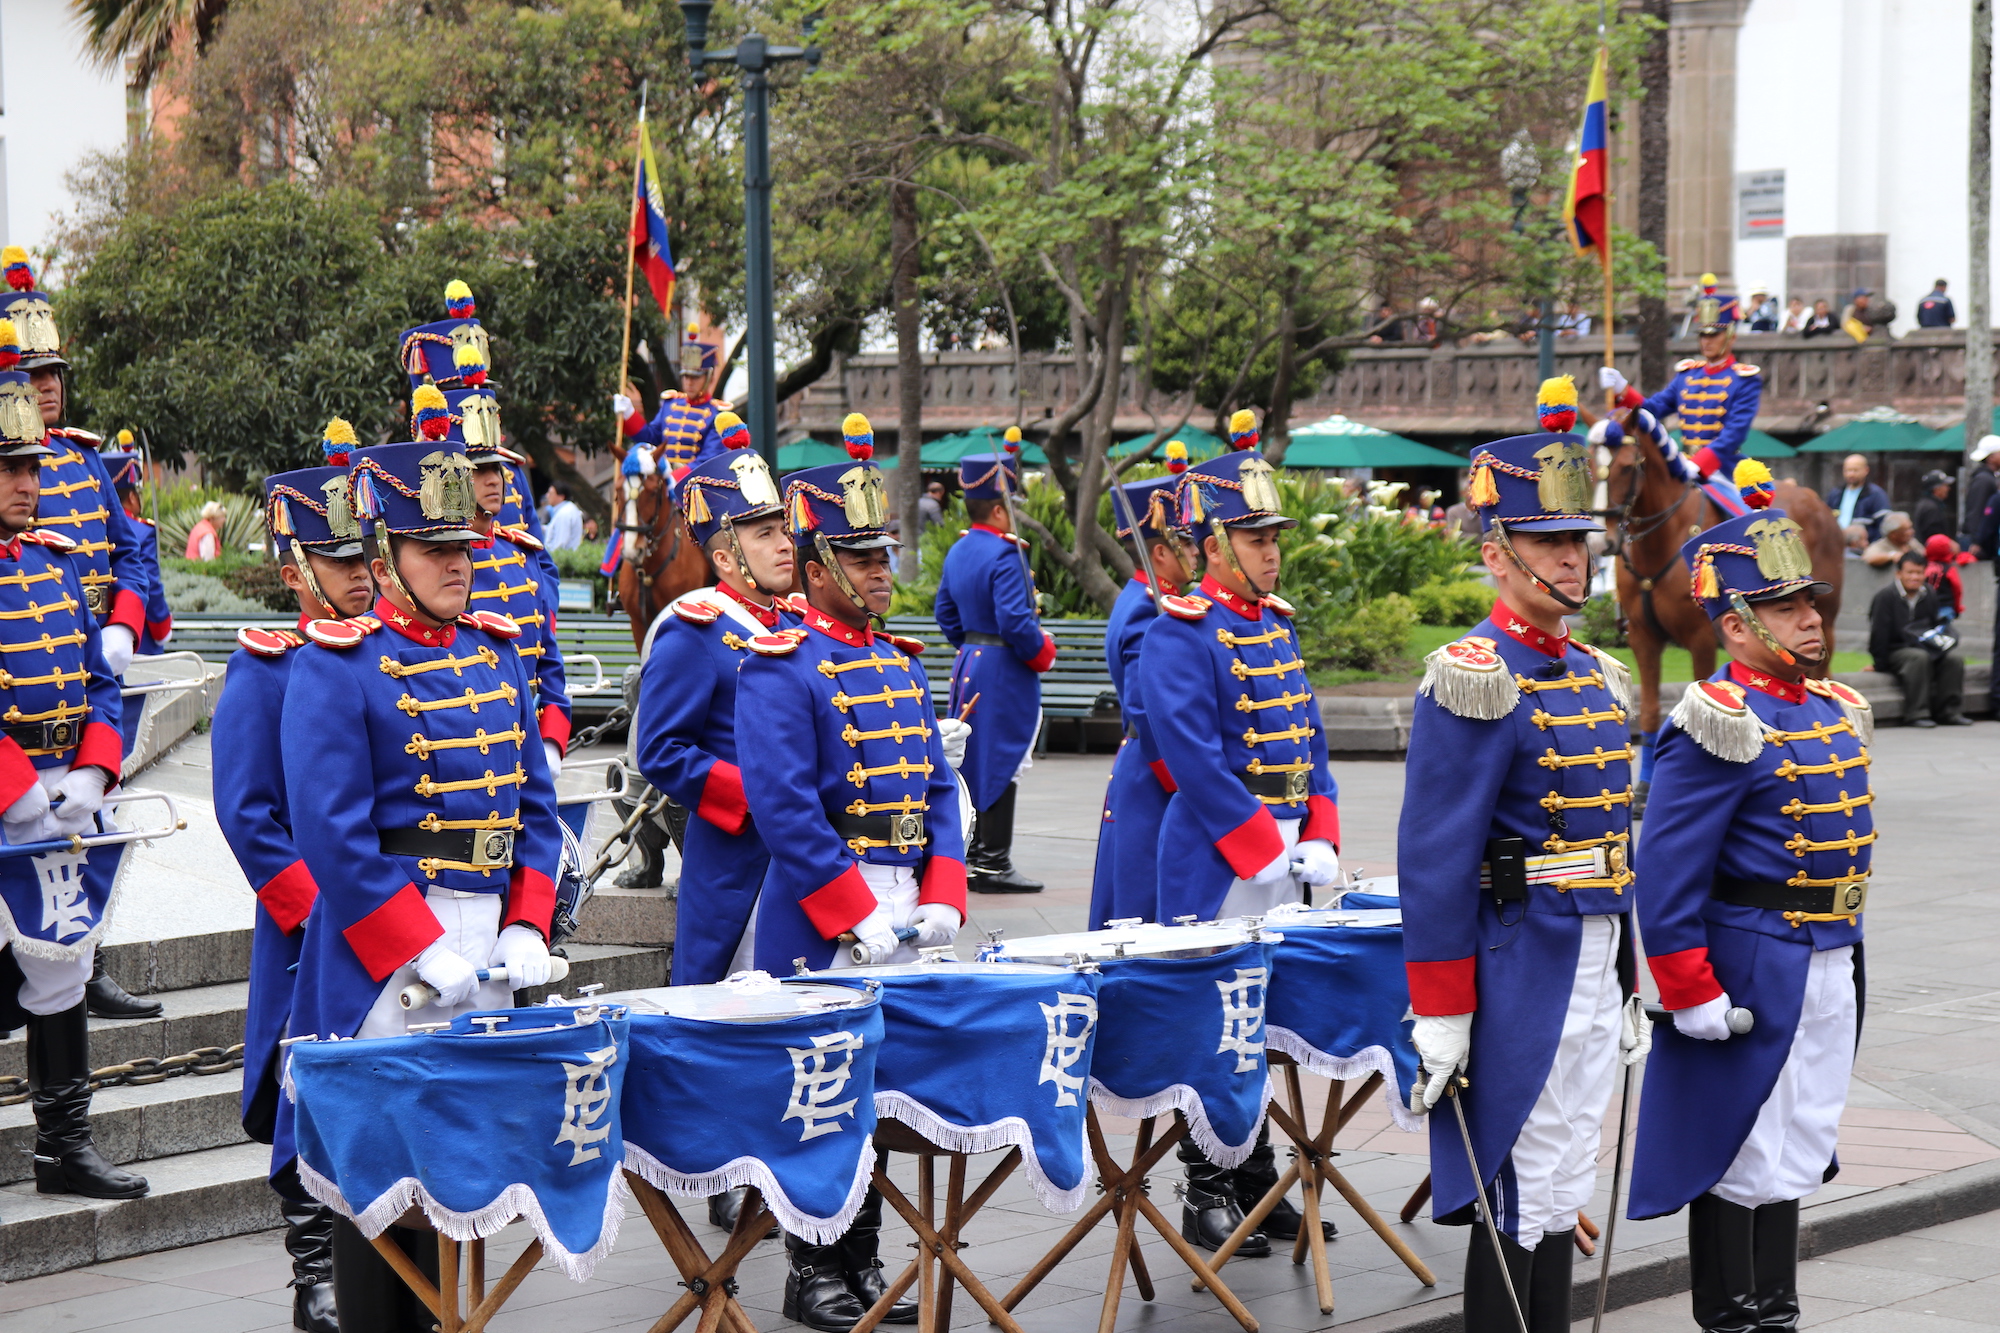 Official guards of Carondelet Palace, Quito